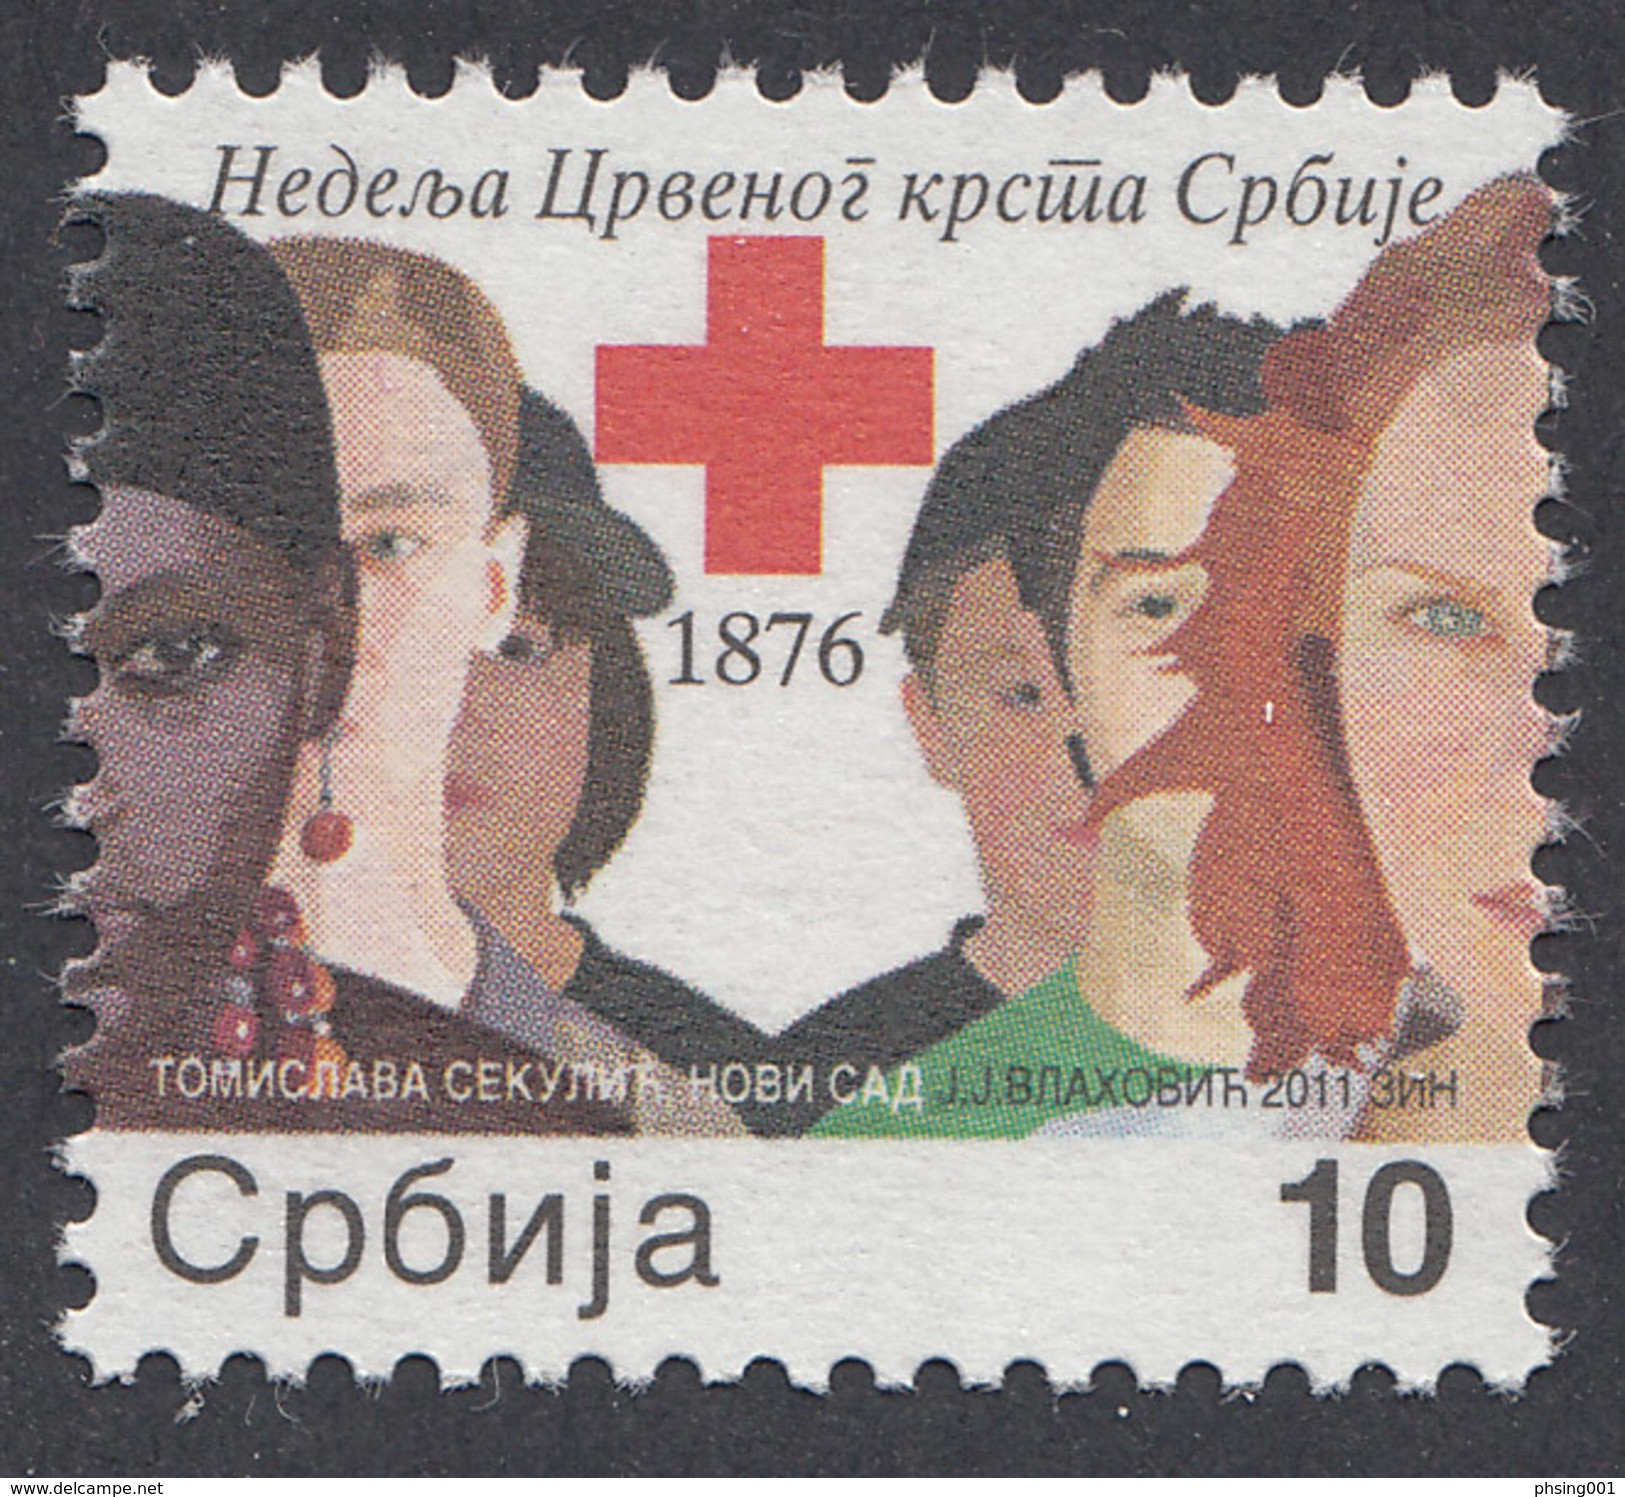 Serbia 2011 Red Cross Rotes Kreuz Croix Rouge, Tax, Charity, Surcharge Stamp MNH - Rotes Kreuz